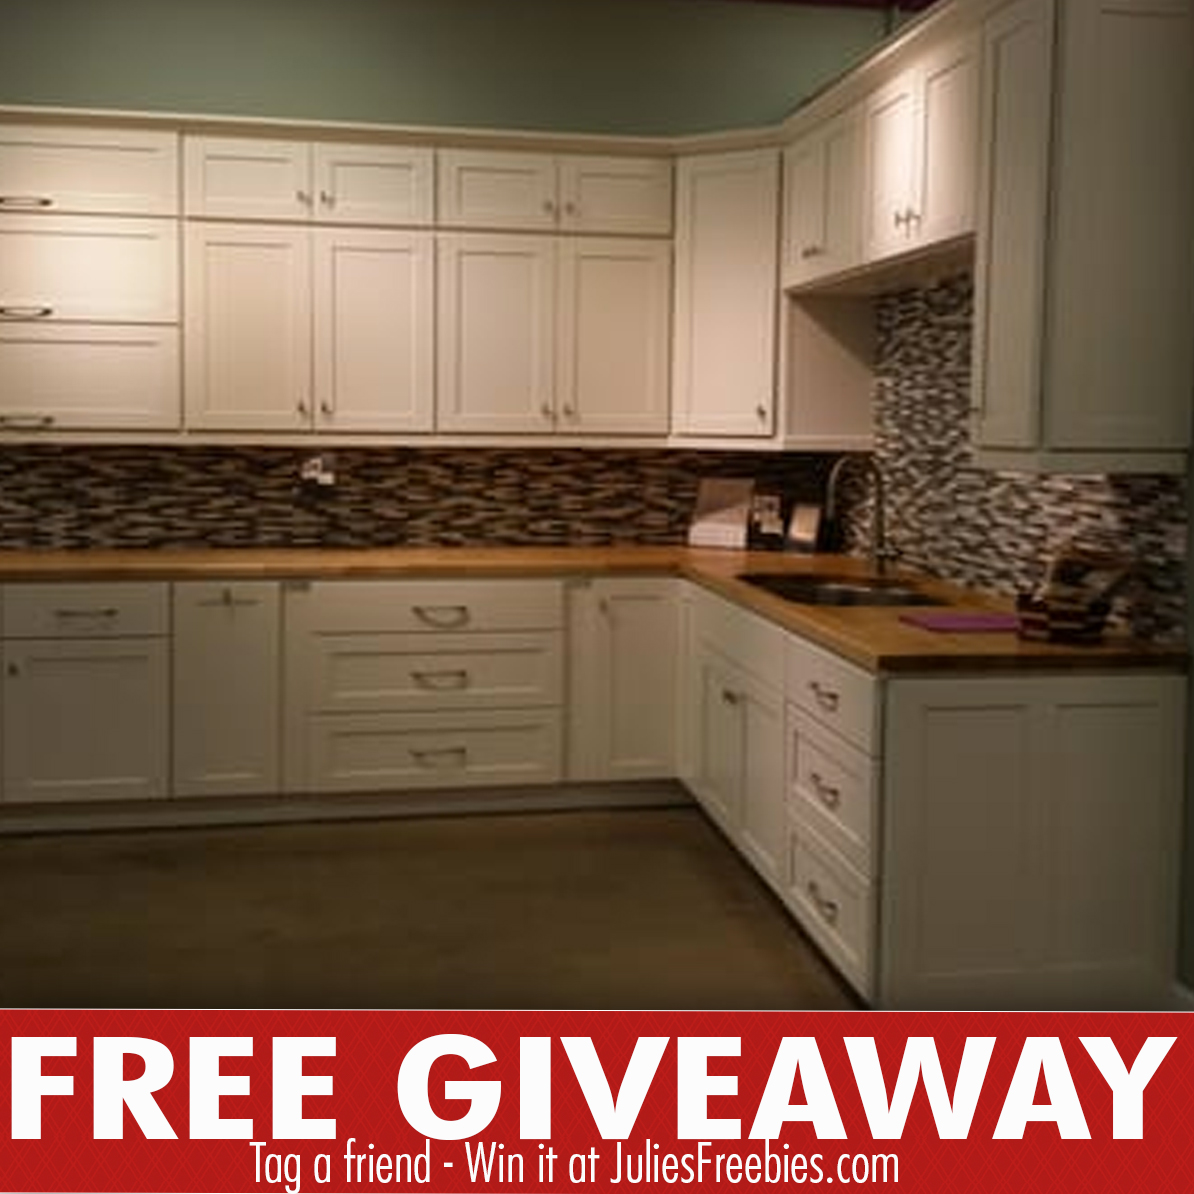 2018 Fall Kitchen Makeover Sweepstakes Julies Freebies